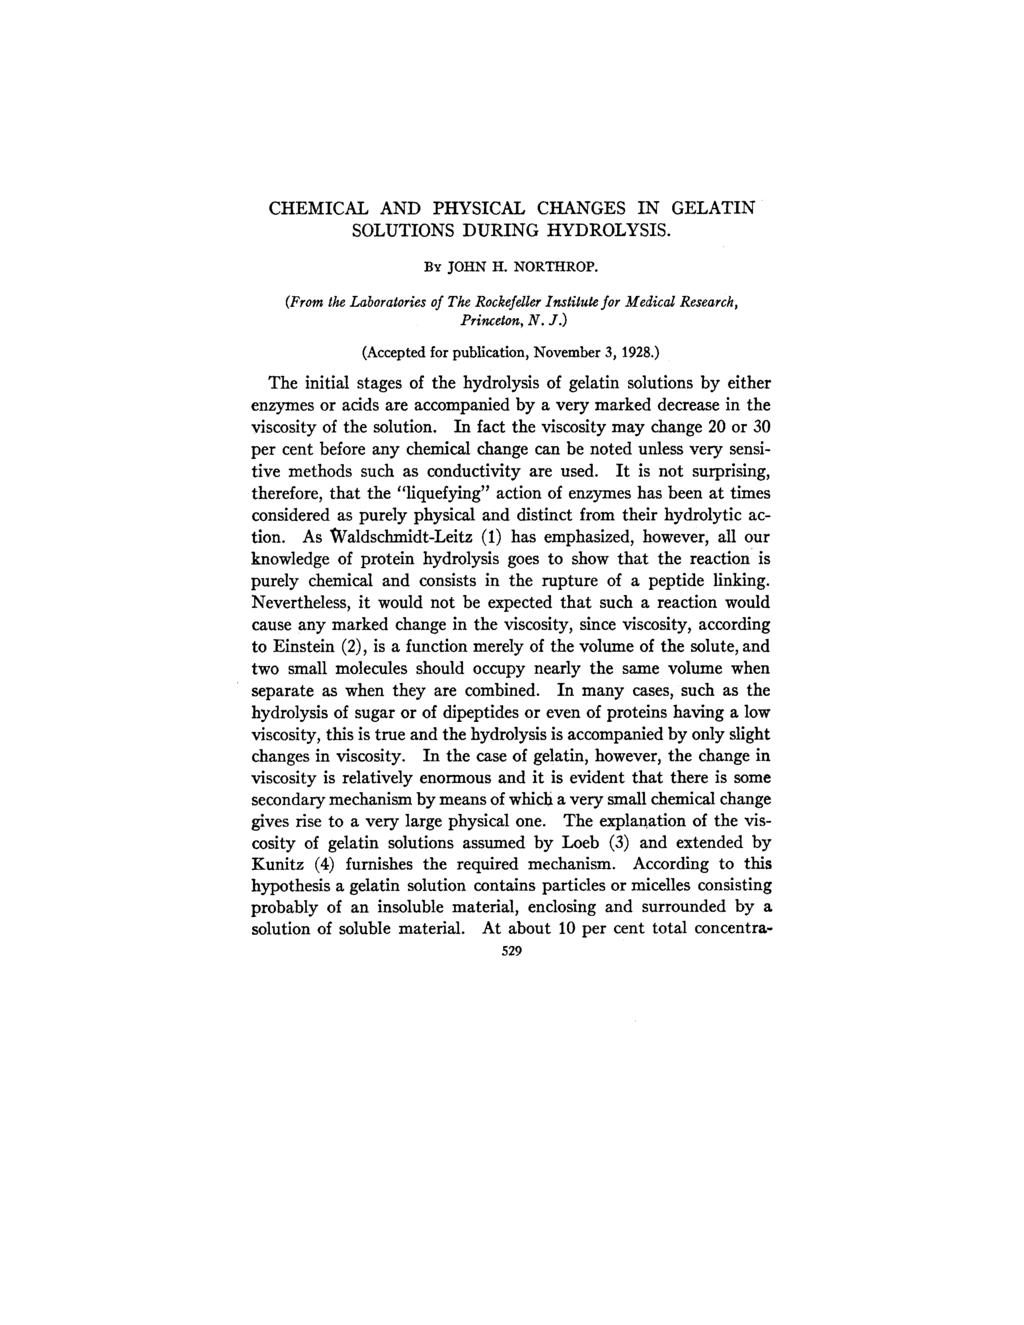 Published Online: 2 March, 1929 Supp Info: http://doi.org/1.185/jgp.12.4.529 Downloaded from jgp.rupress.org on August 26, 218 CHEMICAL AND PHYSICAL CHANGES IN GELATIN SOLUTIONS DURING HYDROLYSIS.